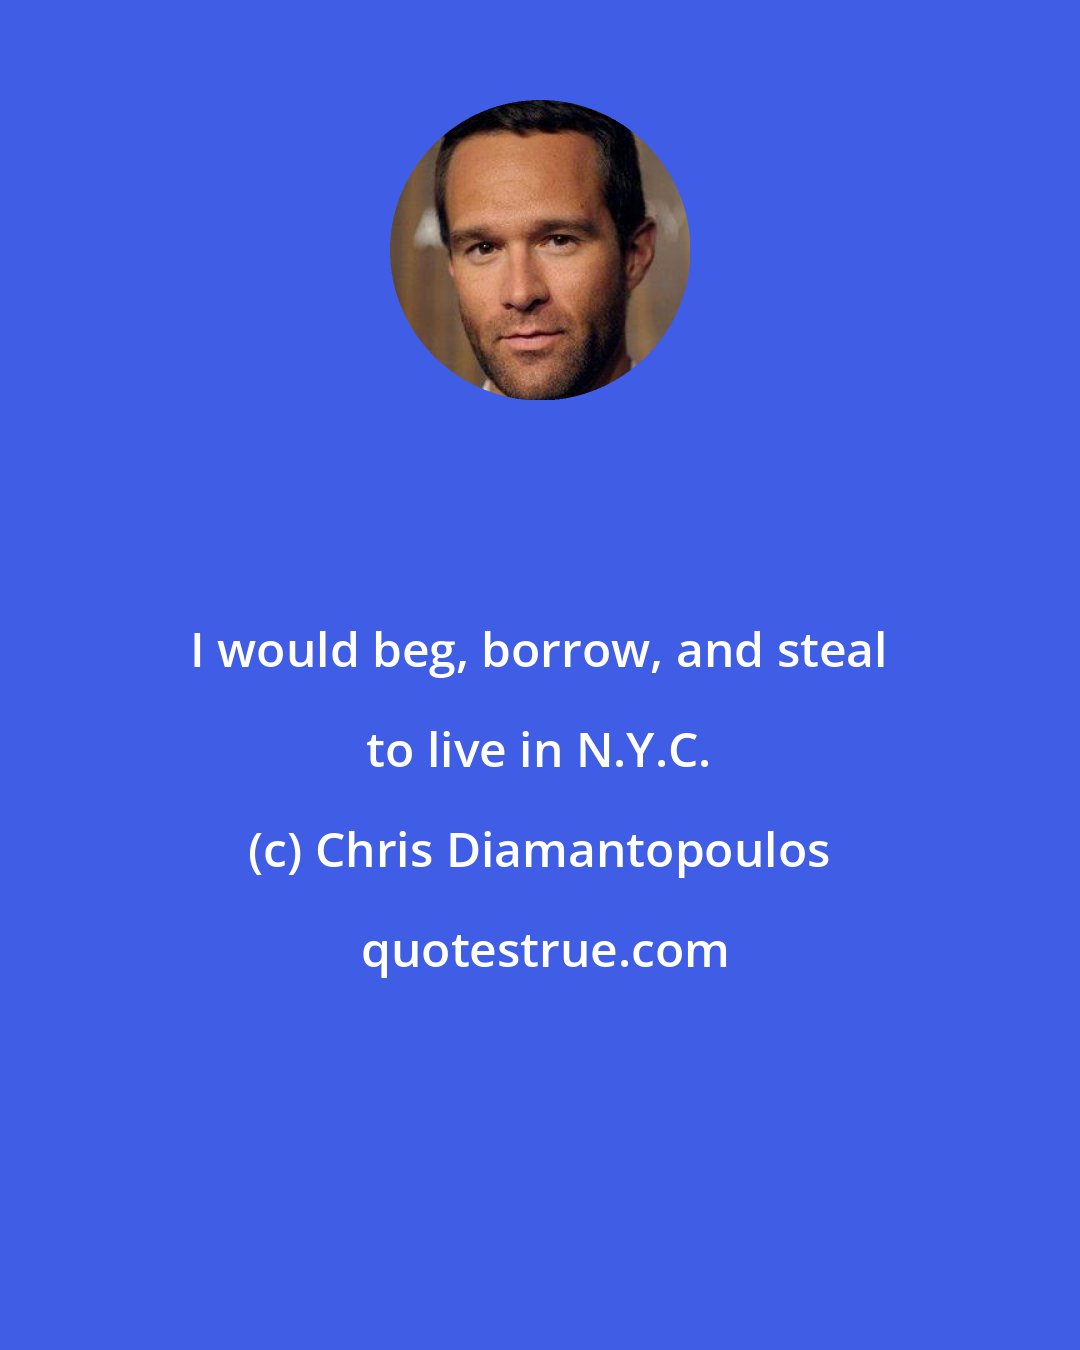 Chris Diamantopoulos: I would beg, borrow, and steal to live in N.Y.C.